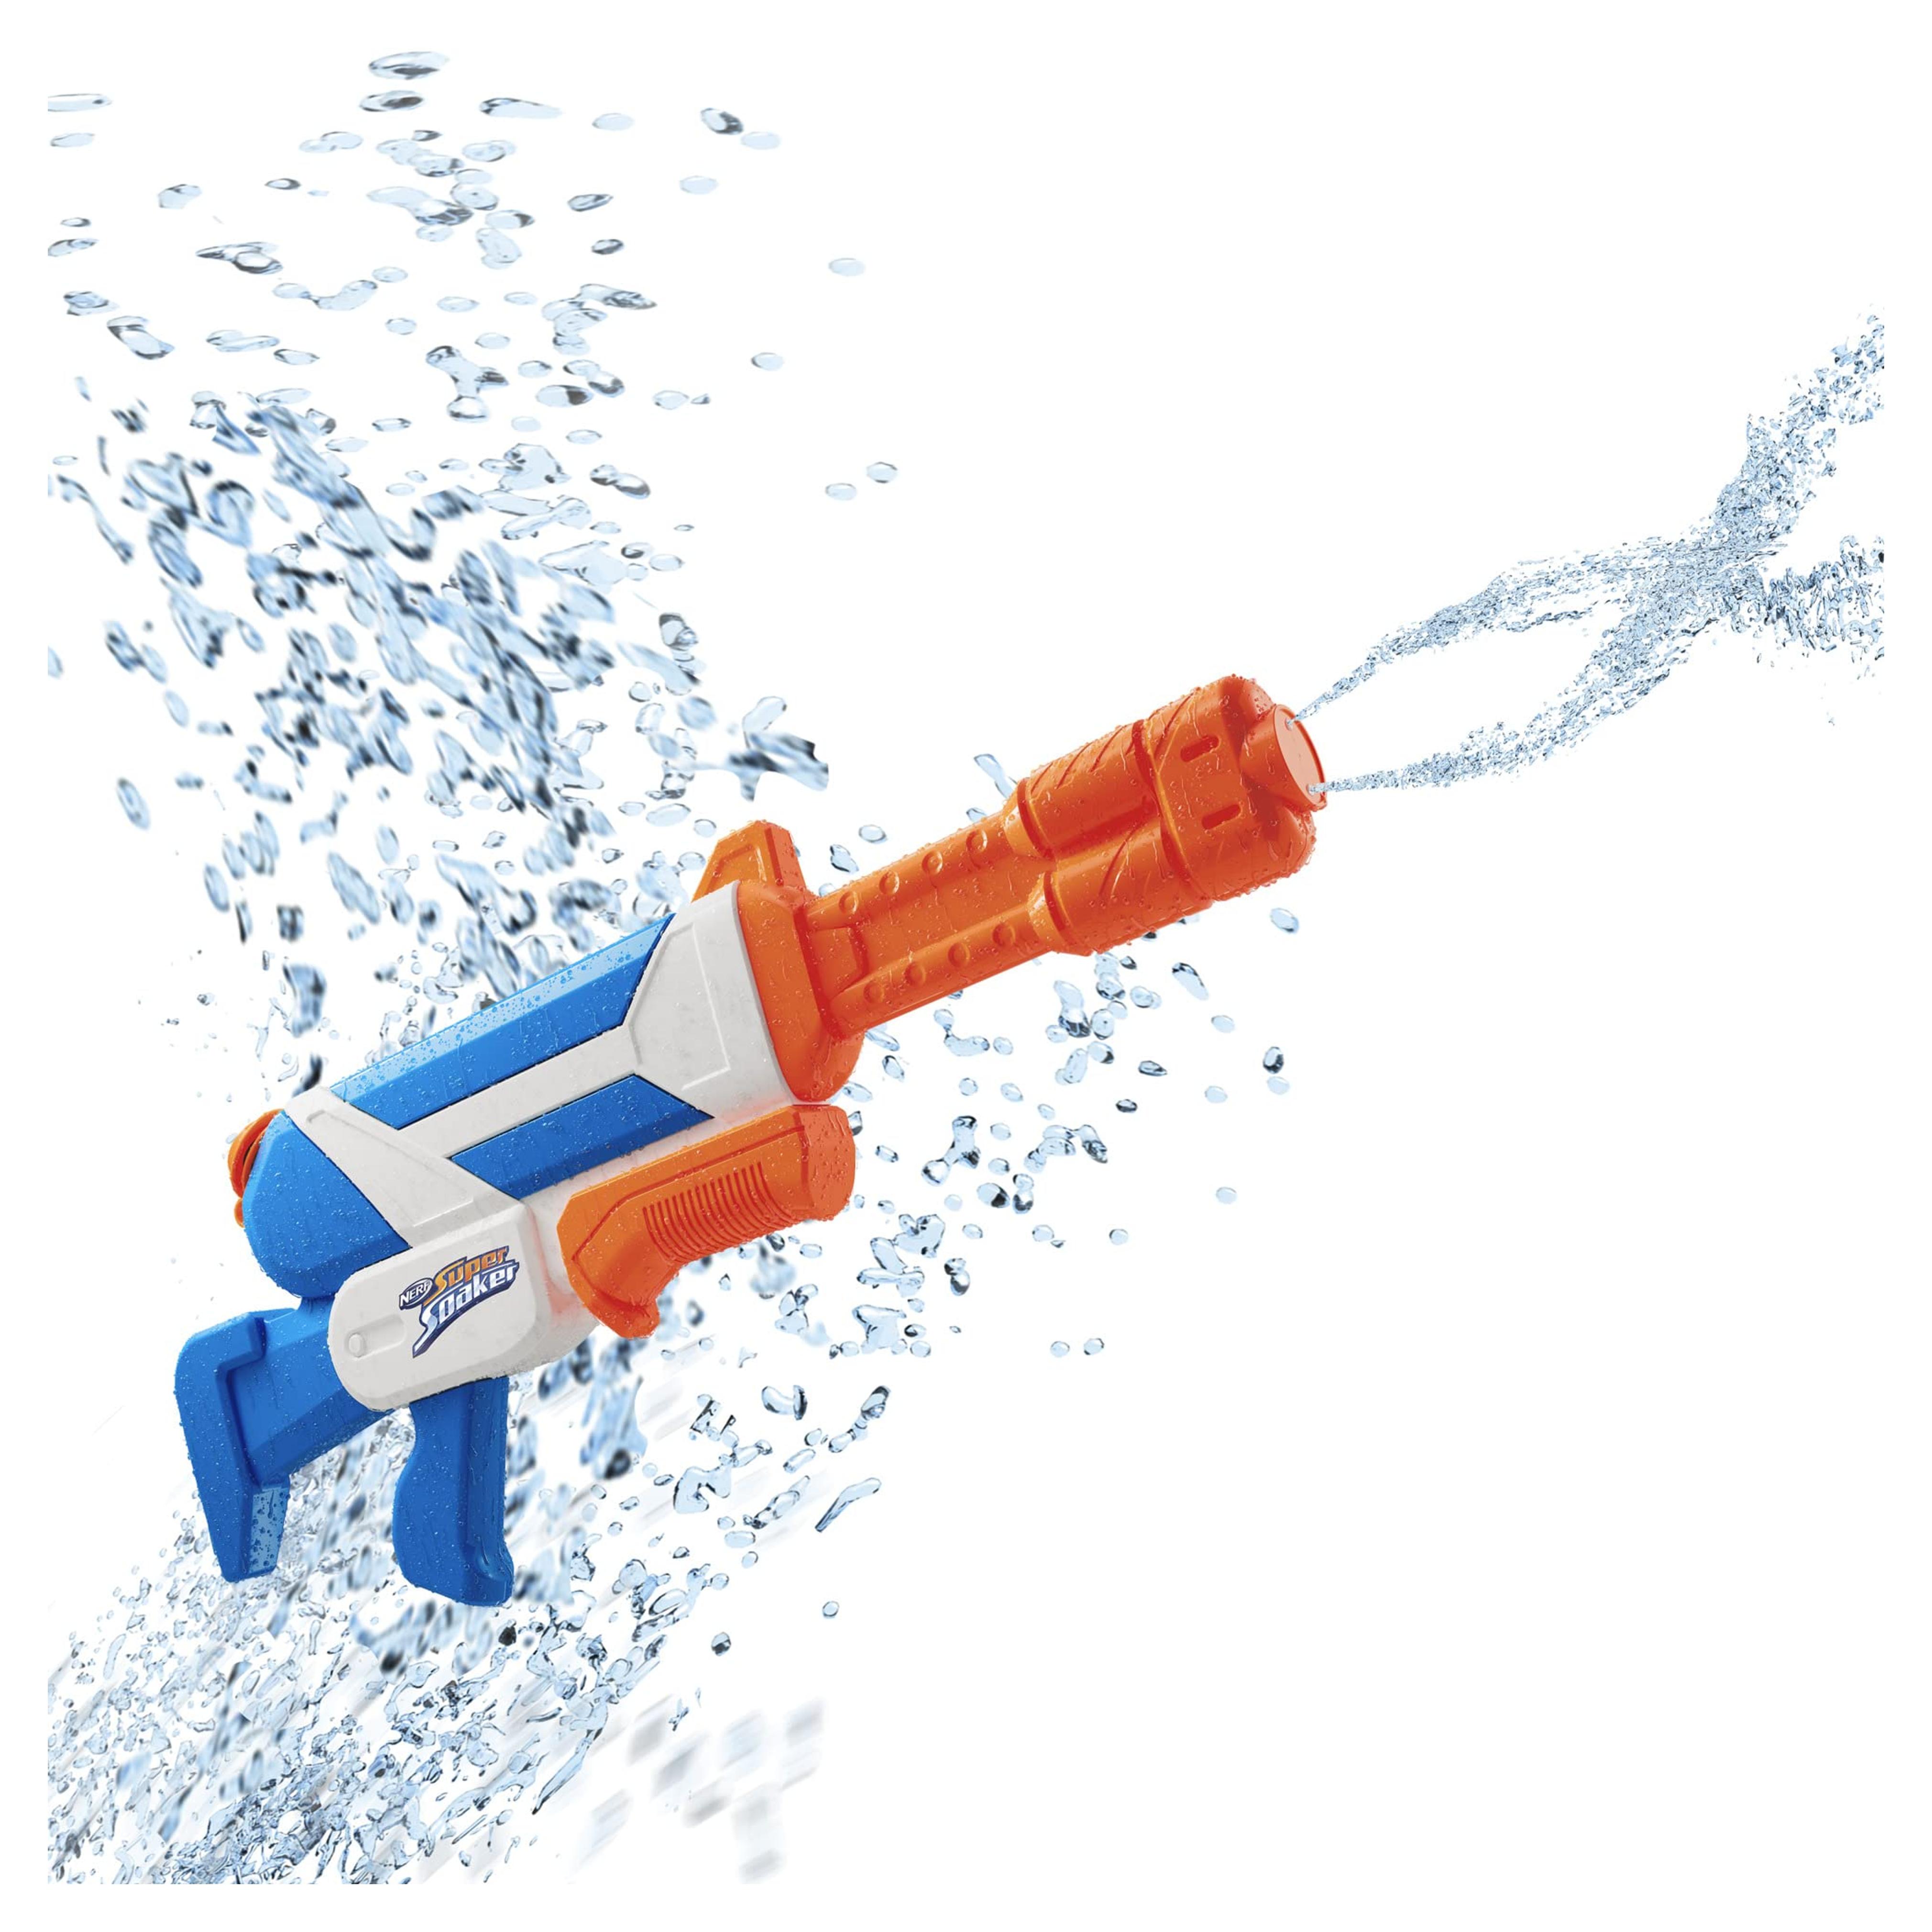 SUPERSOAKER Nerf Super Soaker Twister Water Blaster, 2 Twisting Streams of Water, Pump to Fire, Outdoor Water-Blasting Fun for Kids Teens Adults